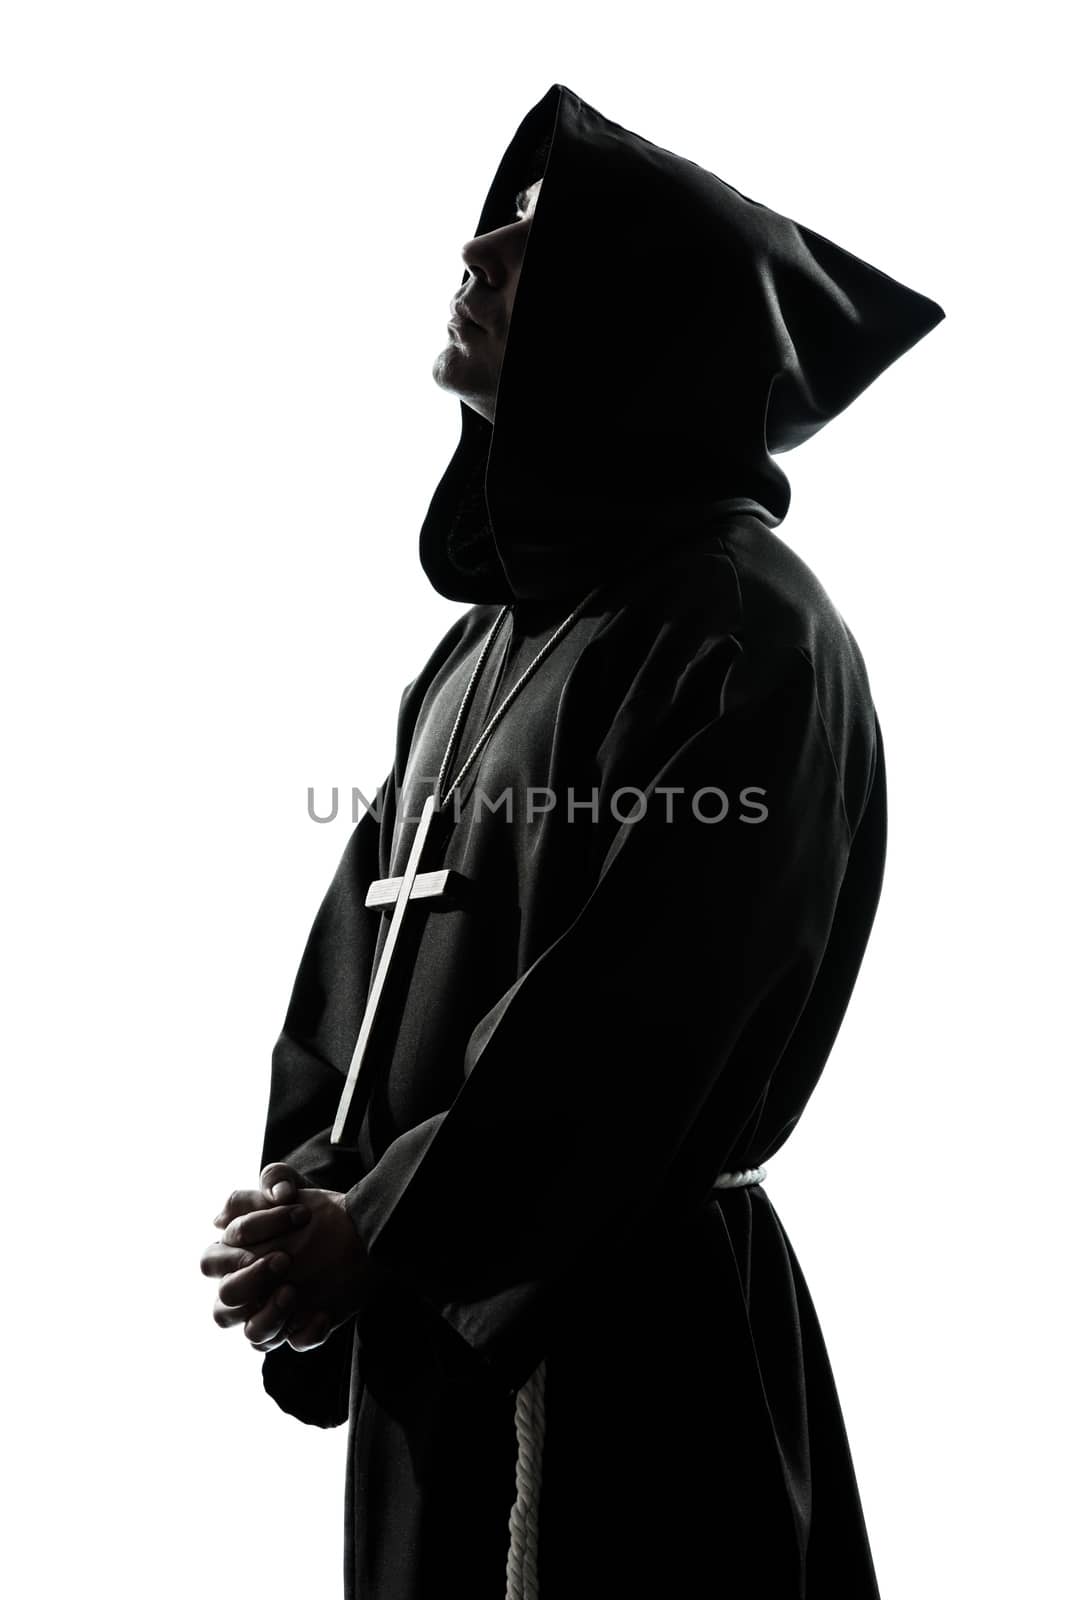 one  man priest praying silhouette in studio isolated on white background